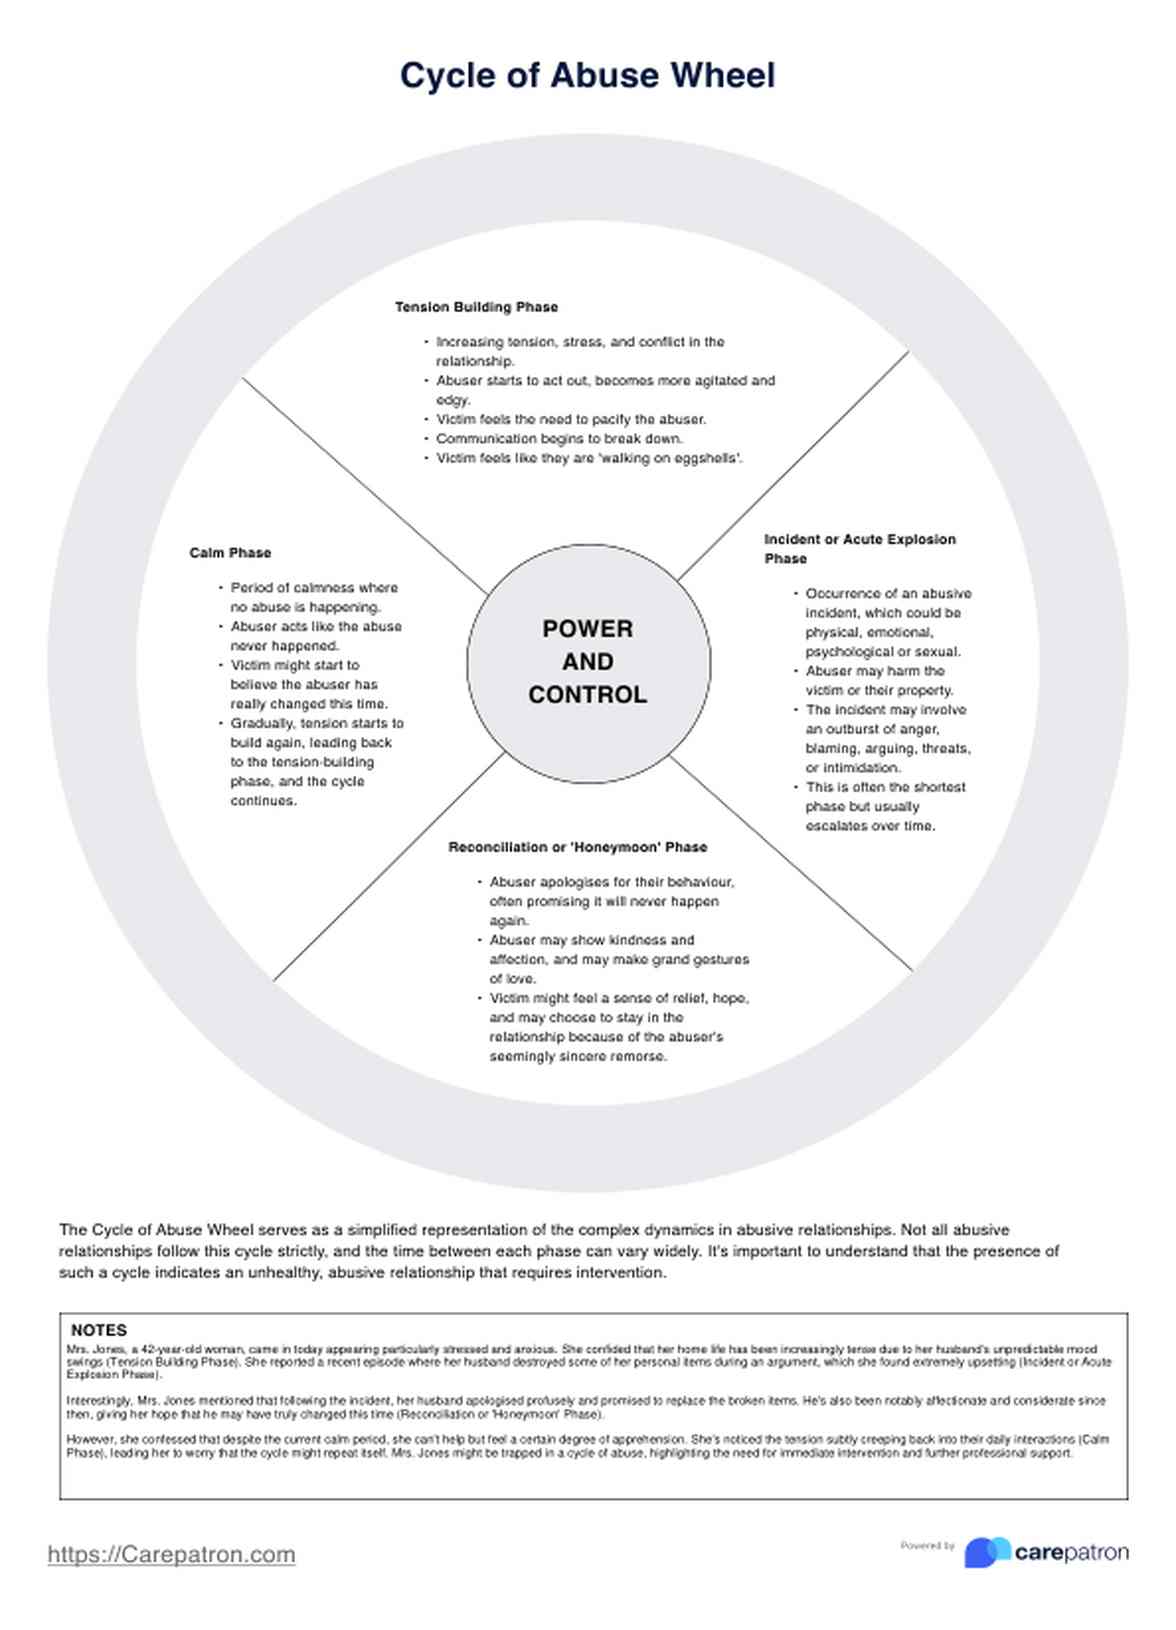 Cycle Of Abuse Wheel PDF Example